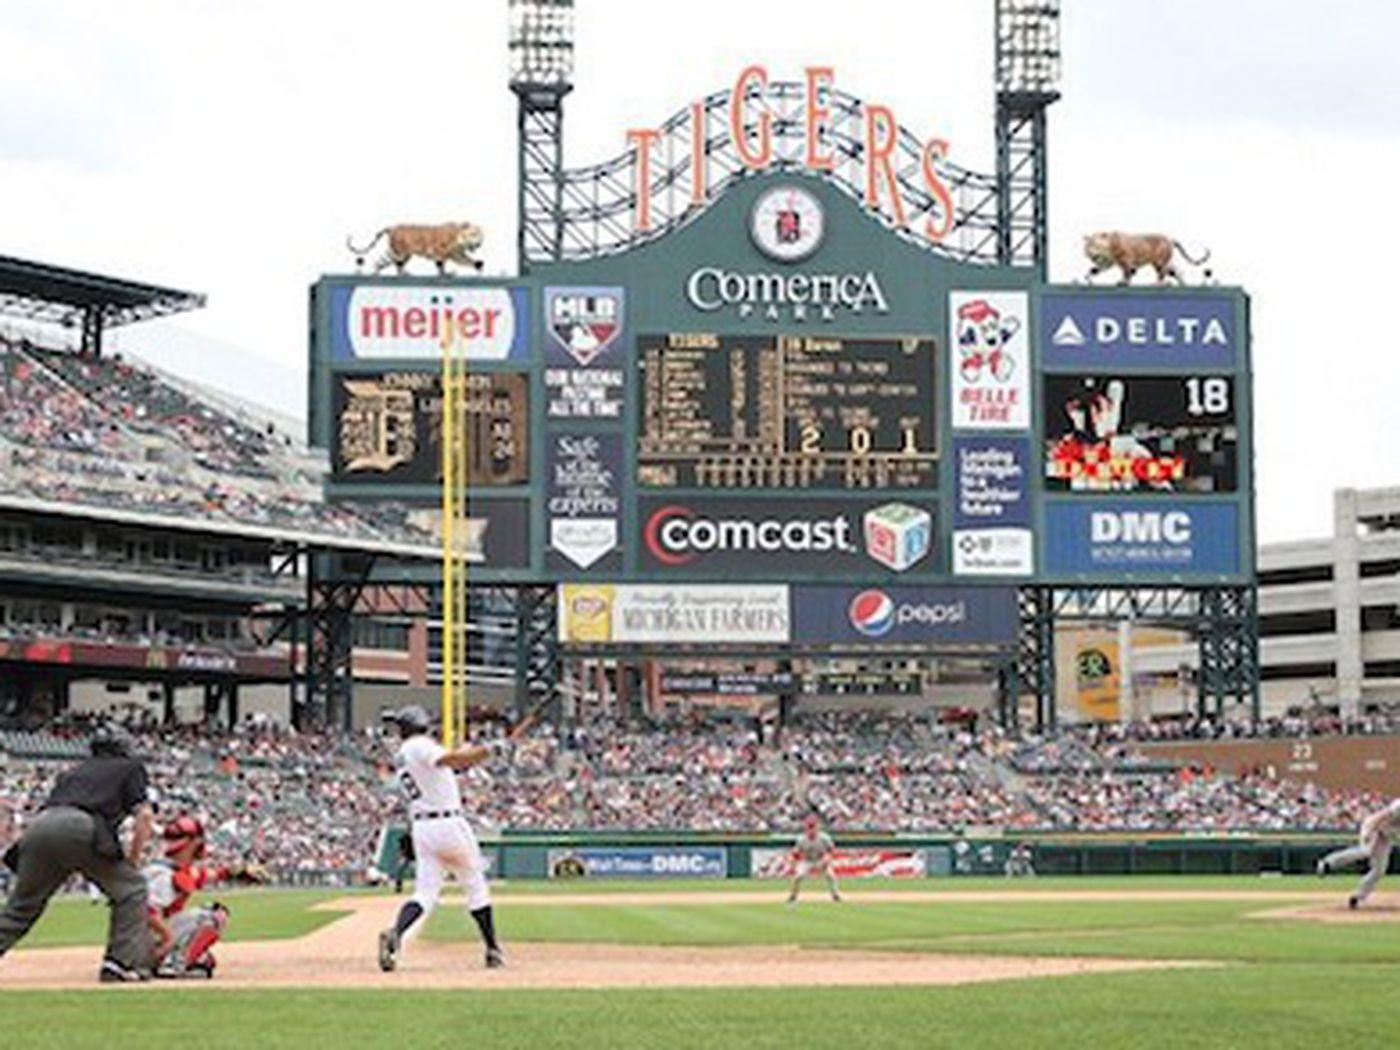 Comerica Park Dining Guide